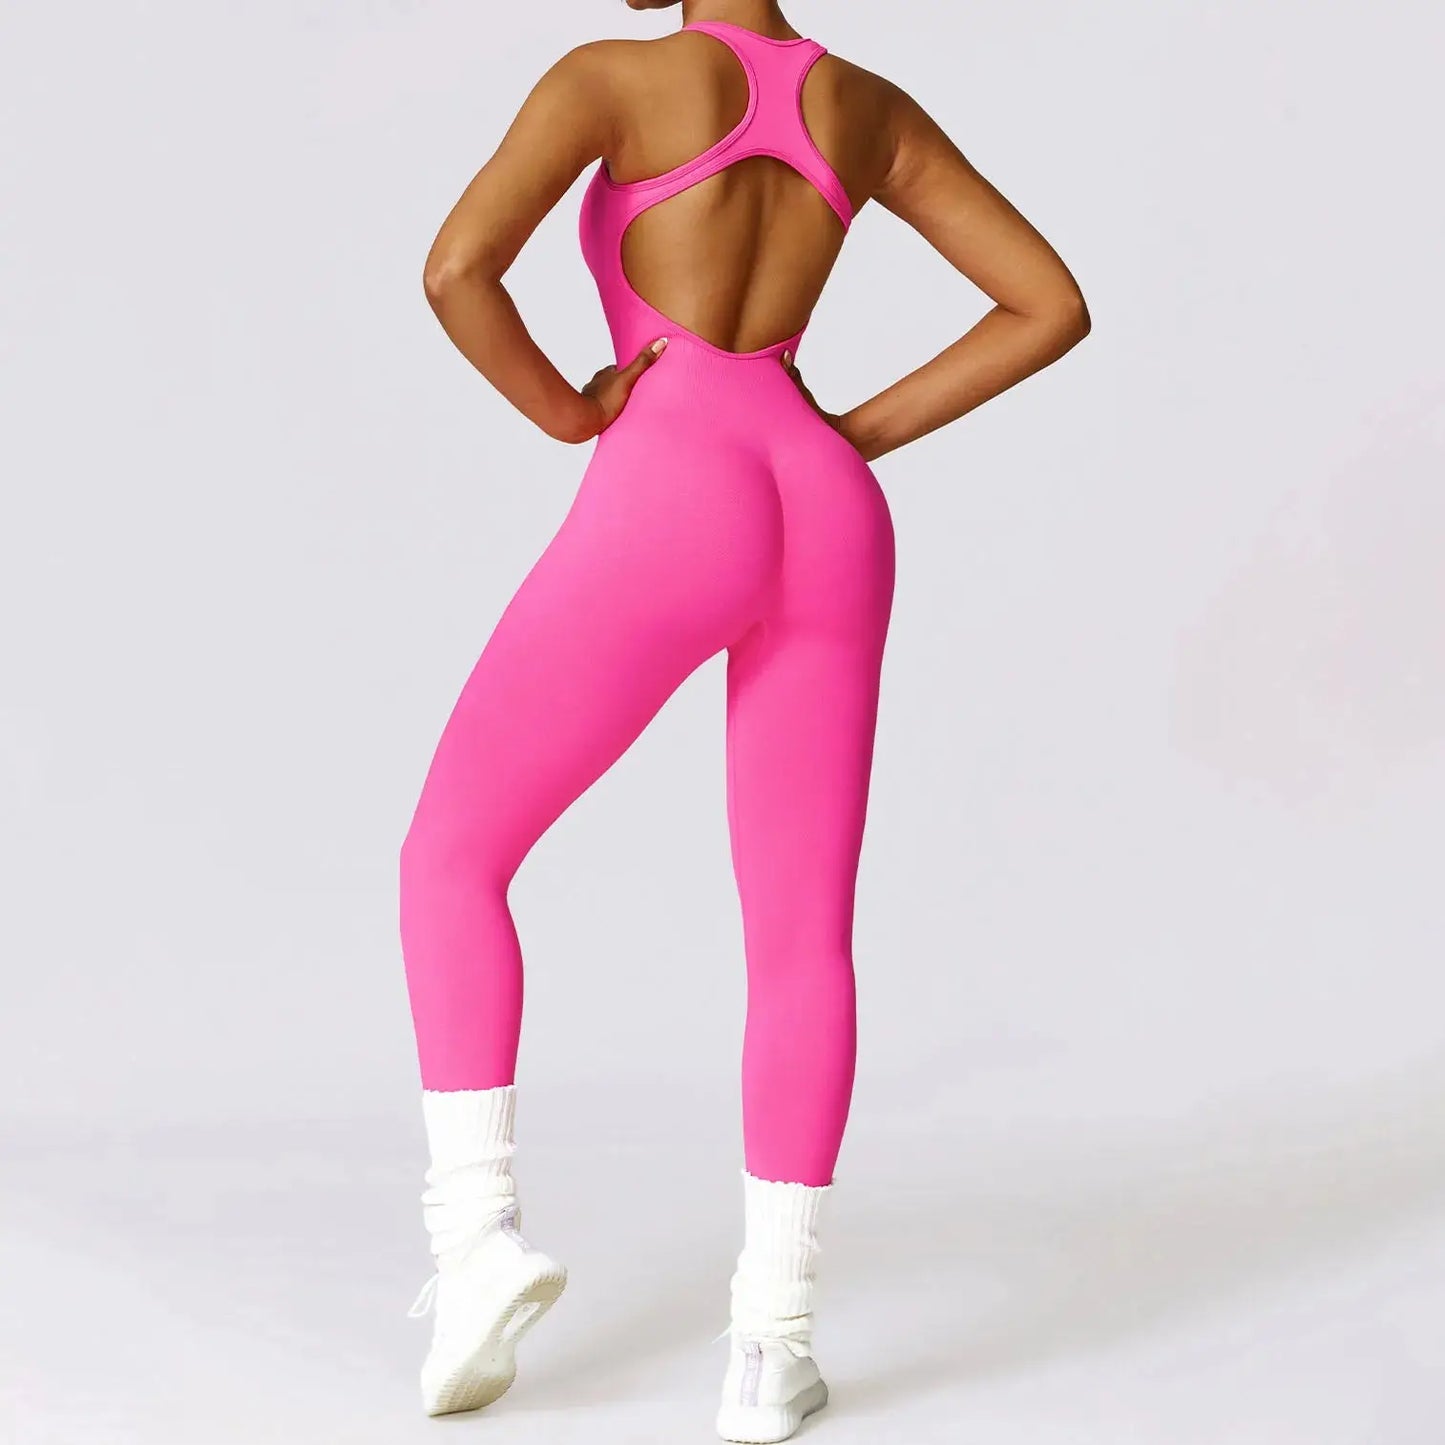 YIYI New Design Sleeveless Workout Rompers Beauty Back Leggings Athletic Jumpsuits One Pieces Seamless Women Yoga Sets Bodysuit